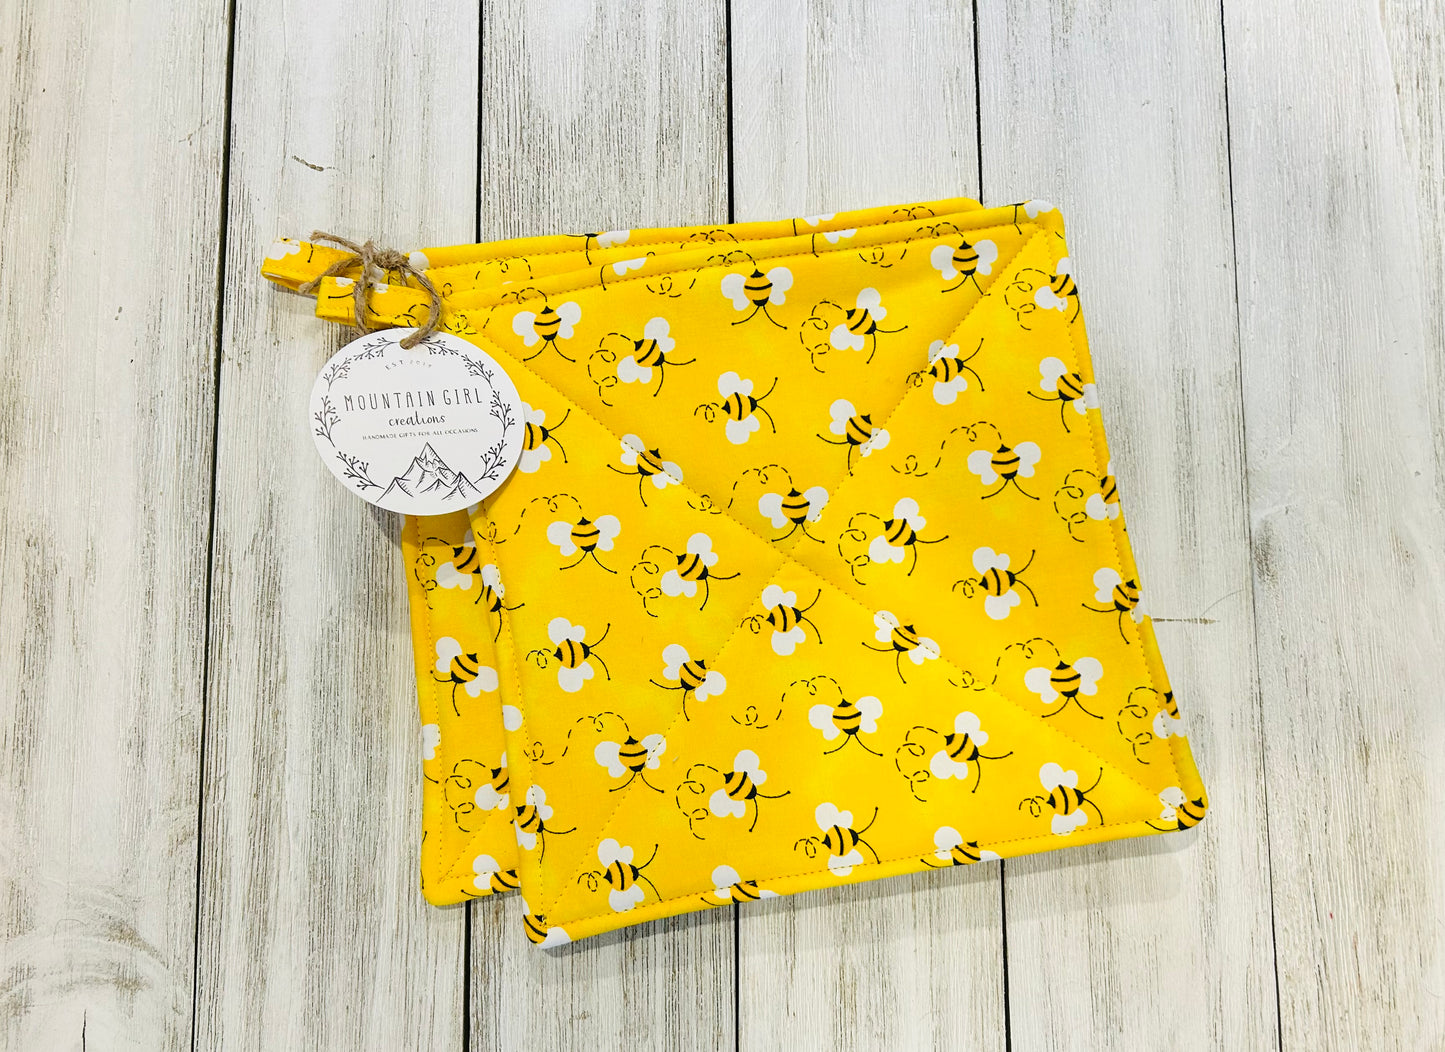 Potholder Set - Bee Themed - Sunflowers and Bee